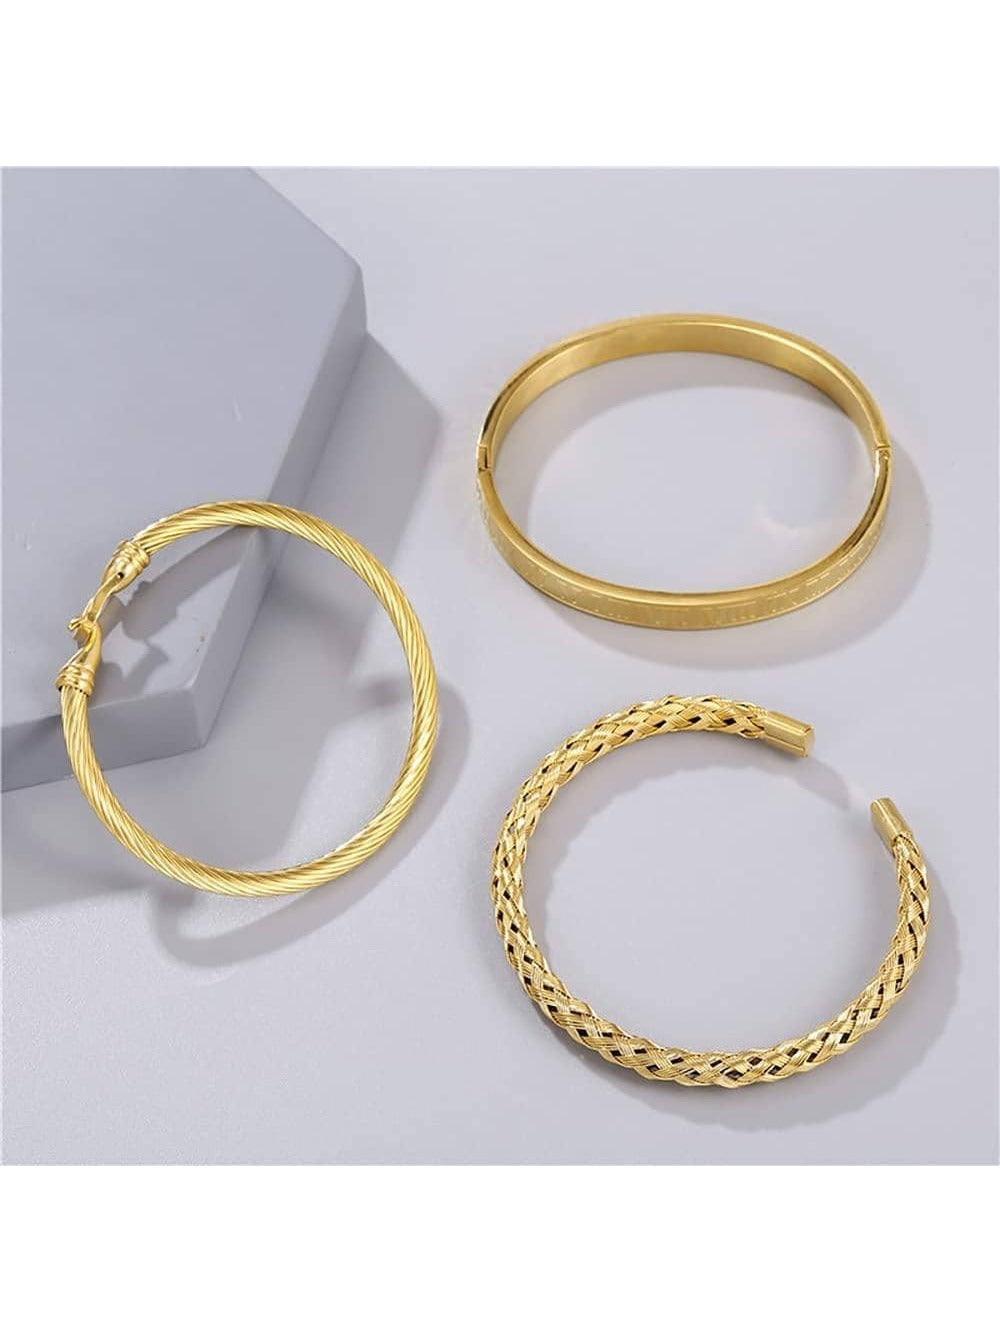 Golden Stainless Steel Roman Numerals Bangle Bracelet Jewelry for